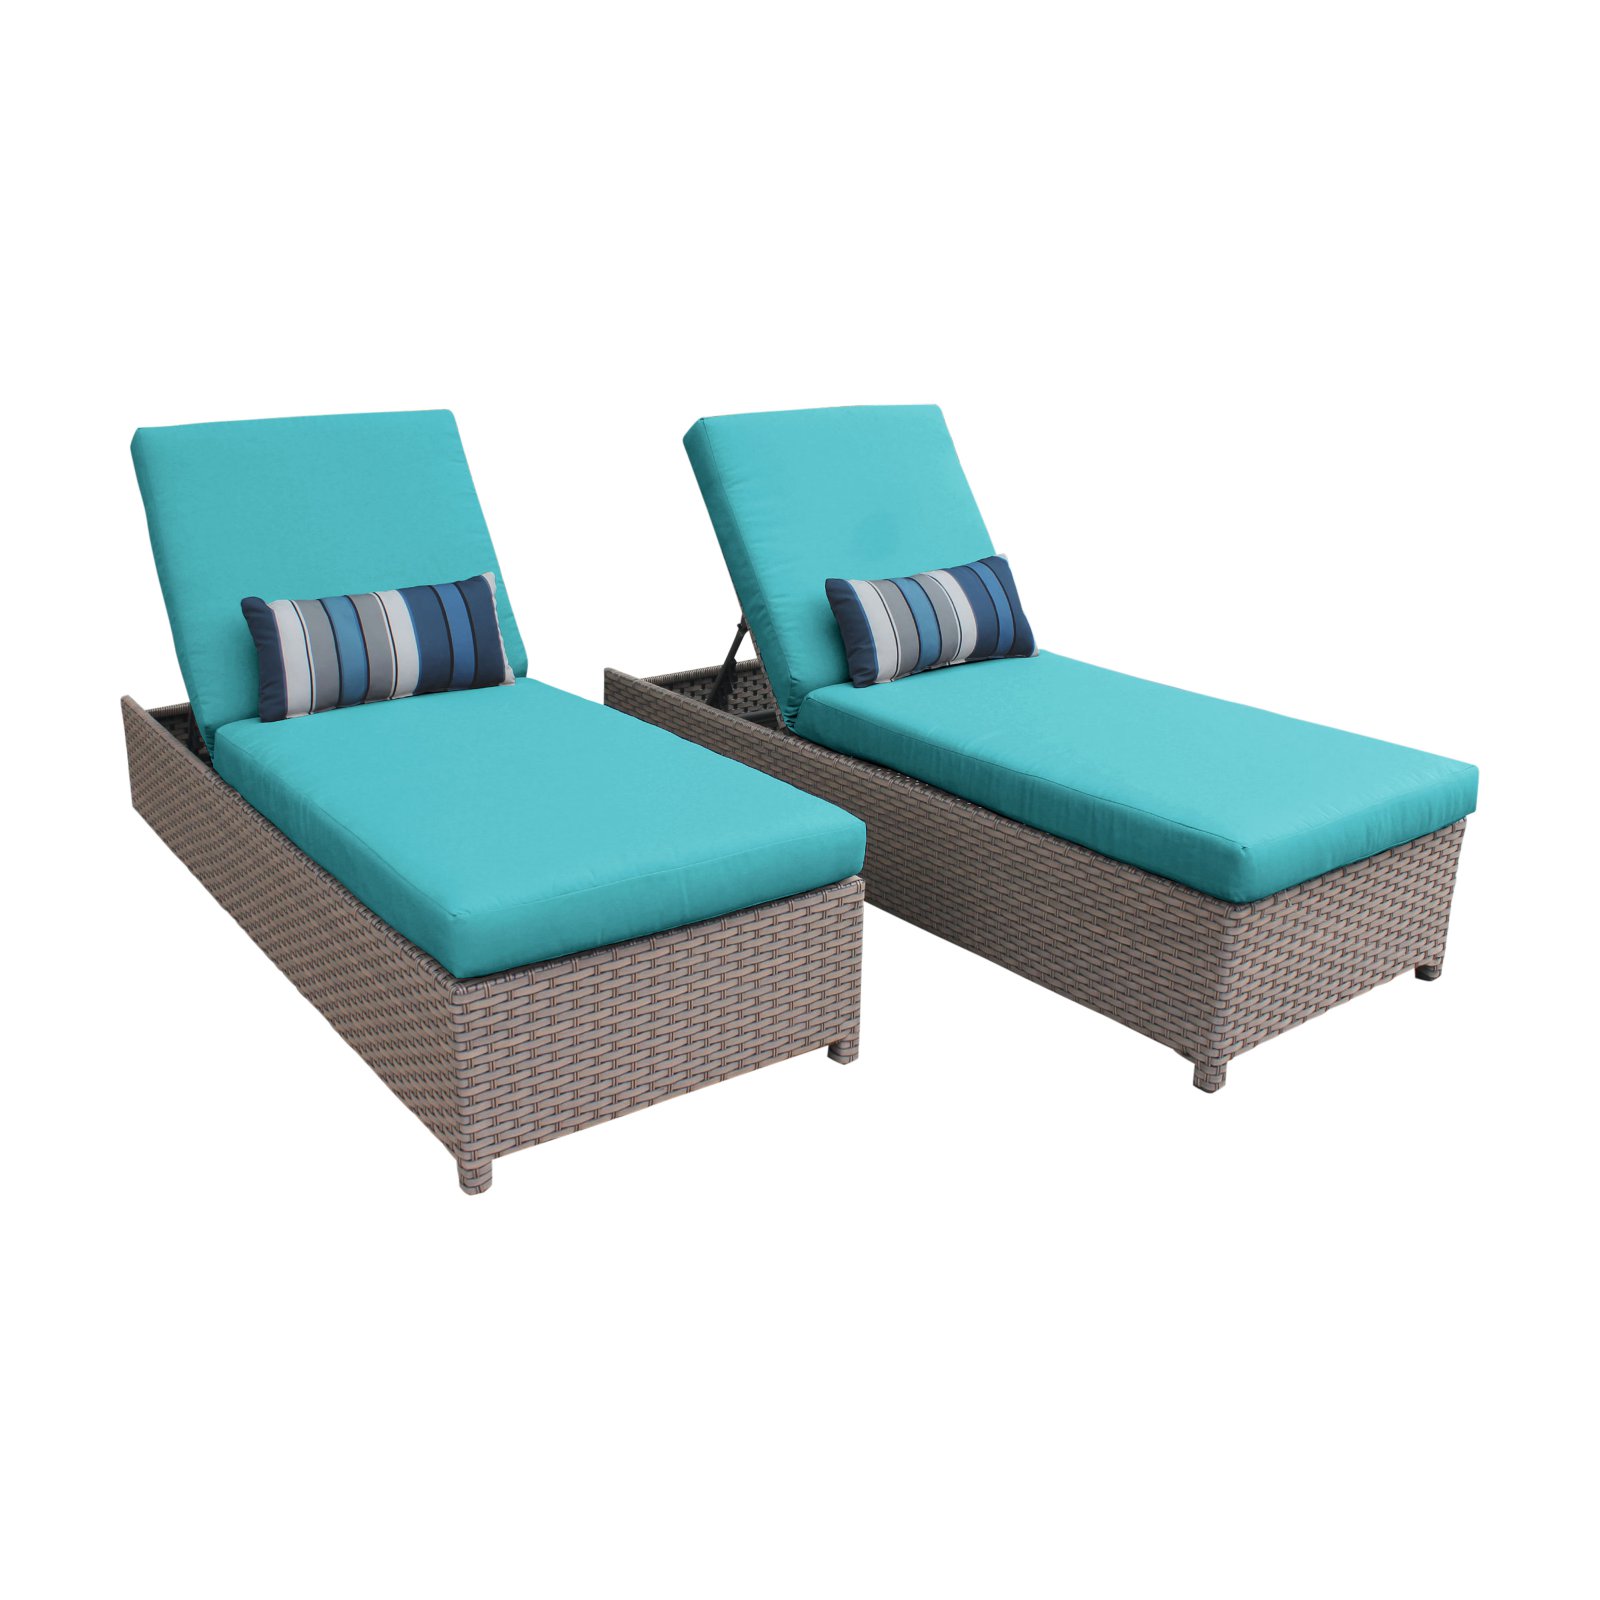 TK Classics Florence Wheeled Wicker Outdoor Chaise Lounge Chair - Set of 2 - image 2 of 11